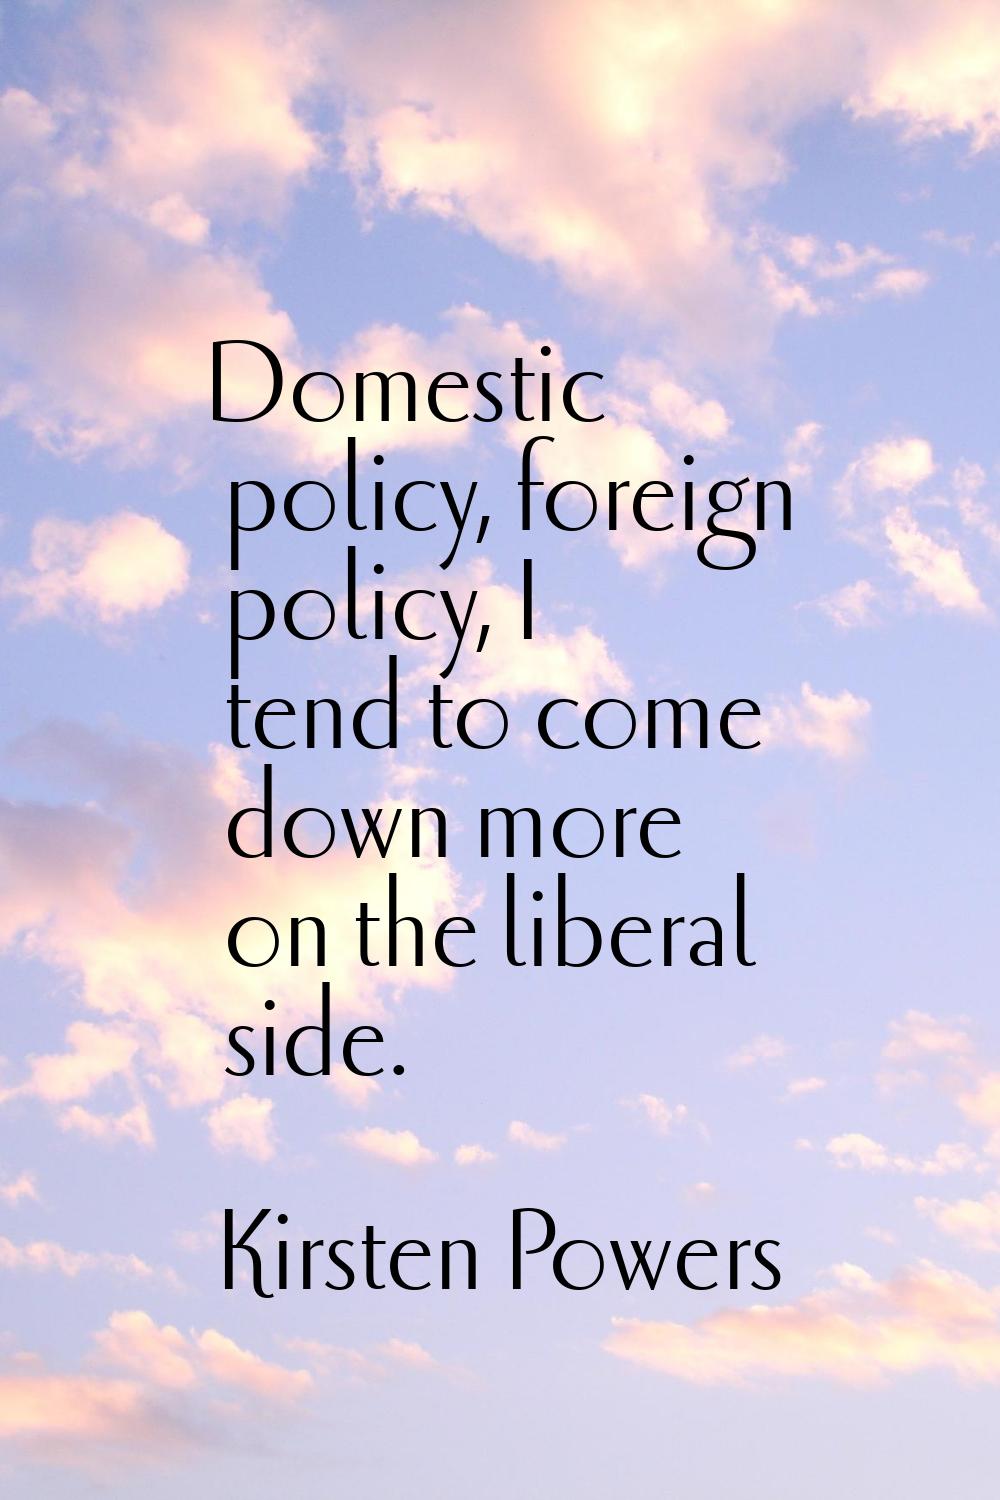 Domestic policy, foreign policy, I tend to come down more on the liberal side.